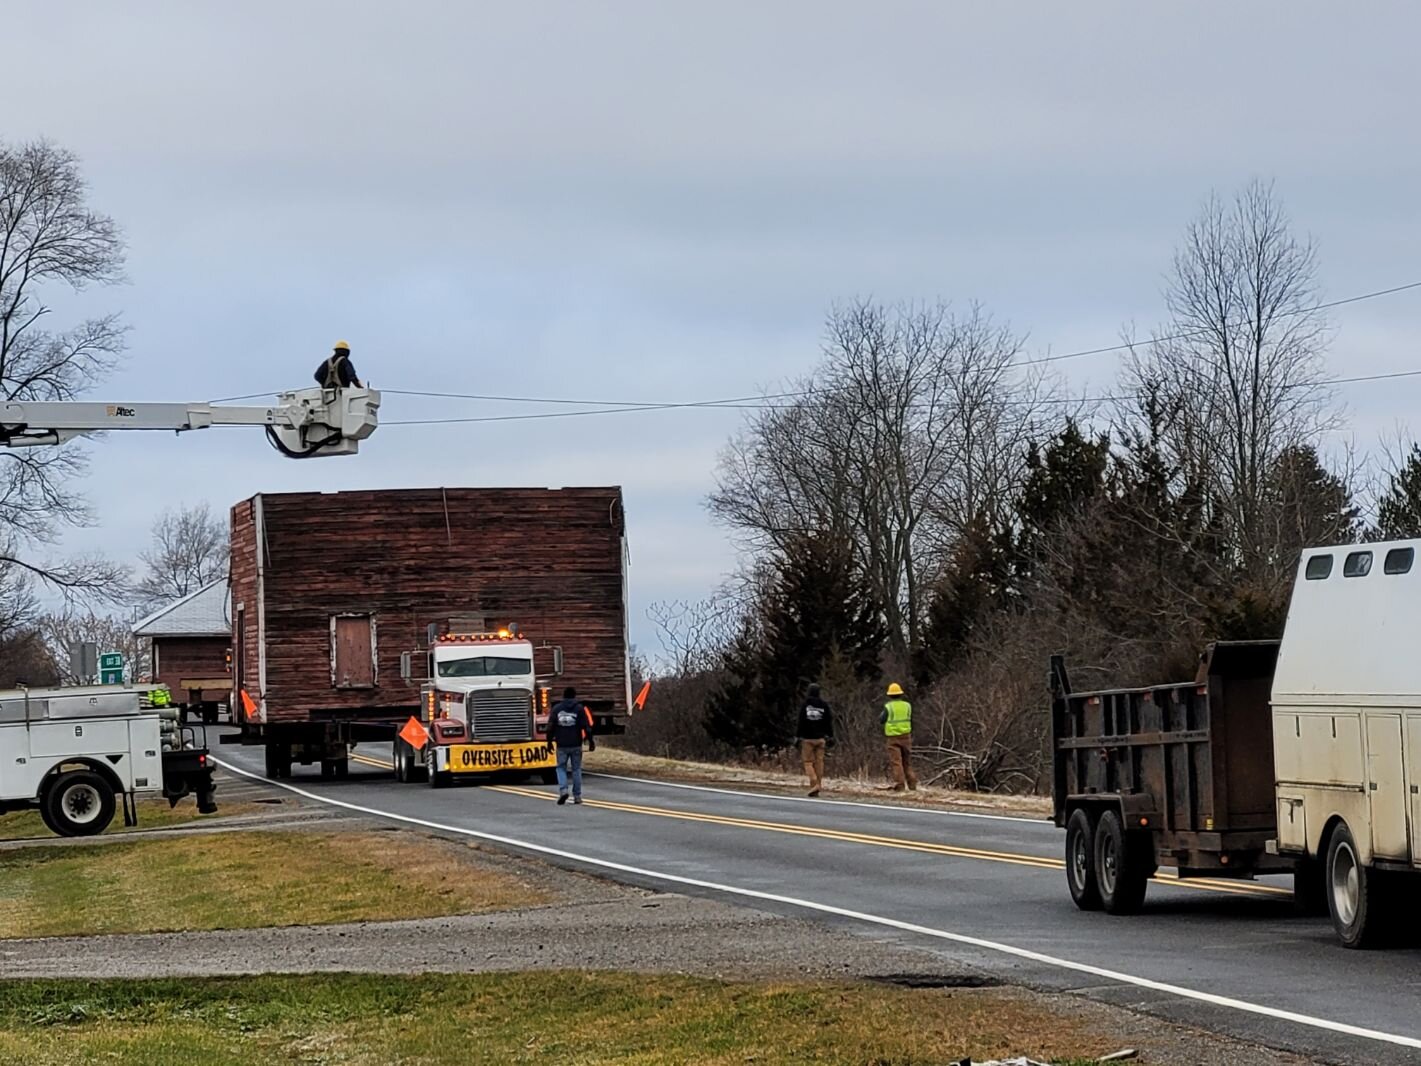 The Lockwood/Avery granary being moved from its original location to the Calhoun County Fairgrounds just outside of Marshall.